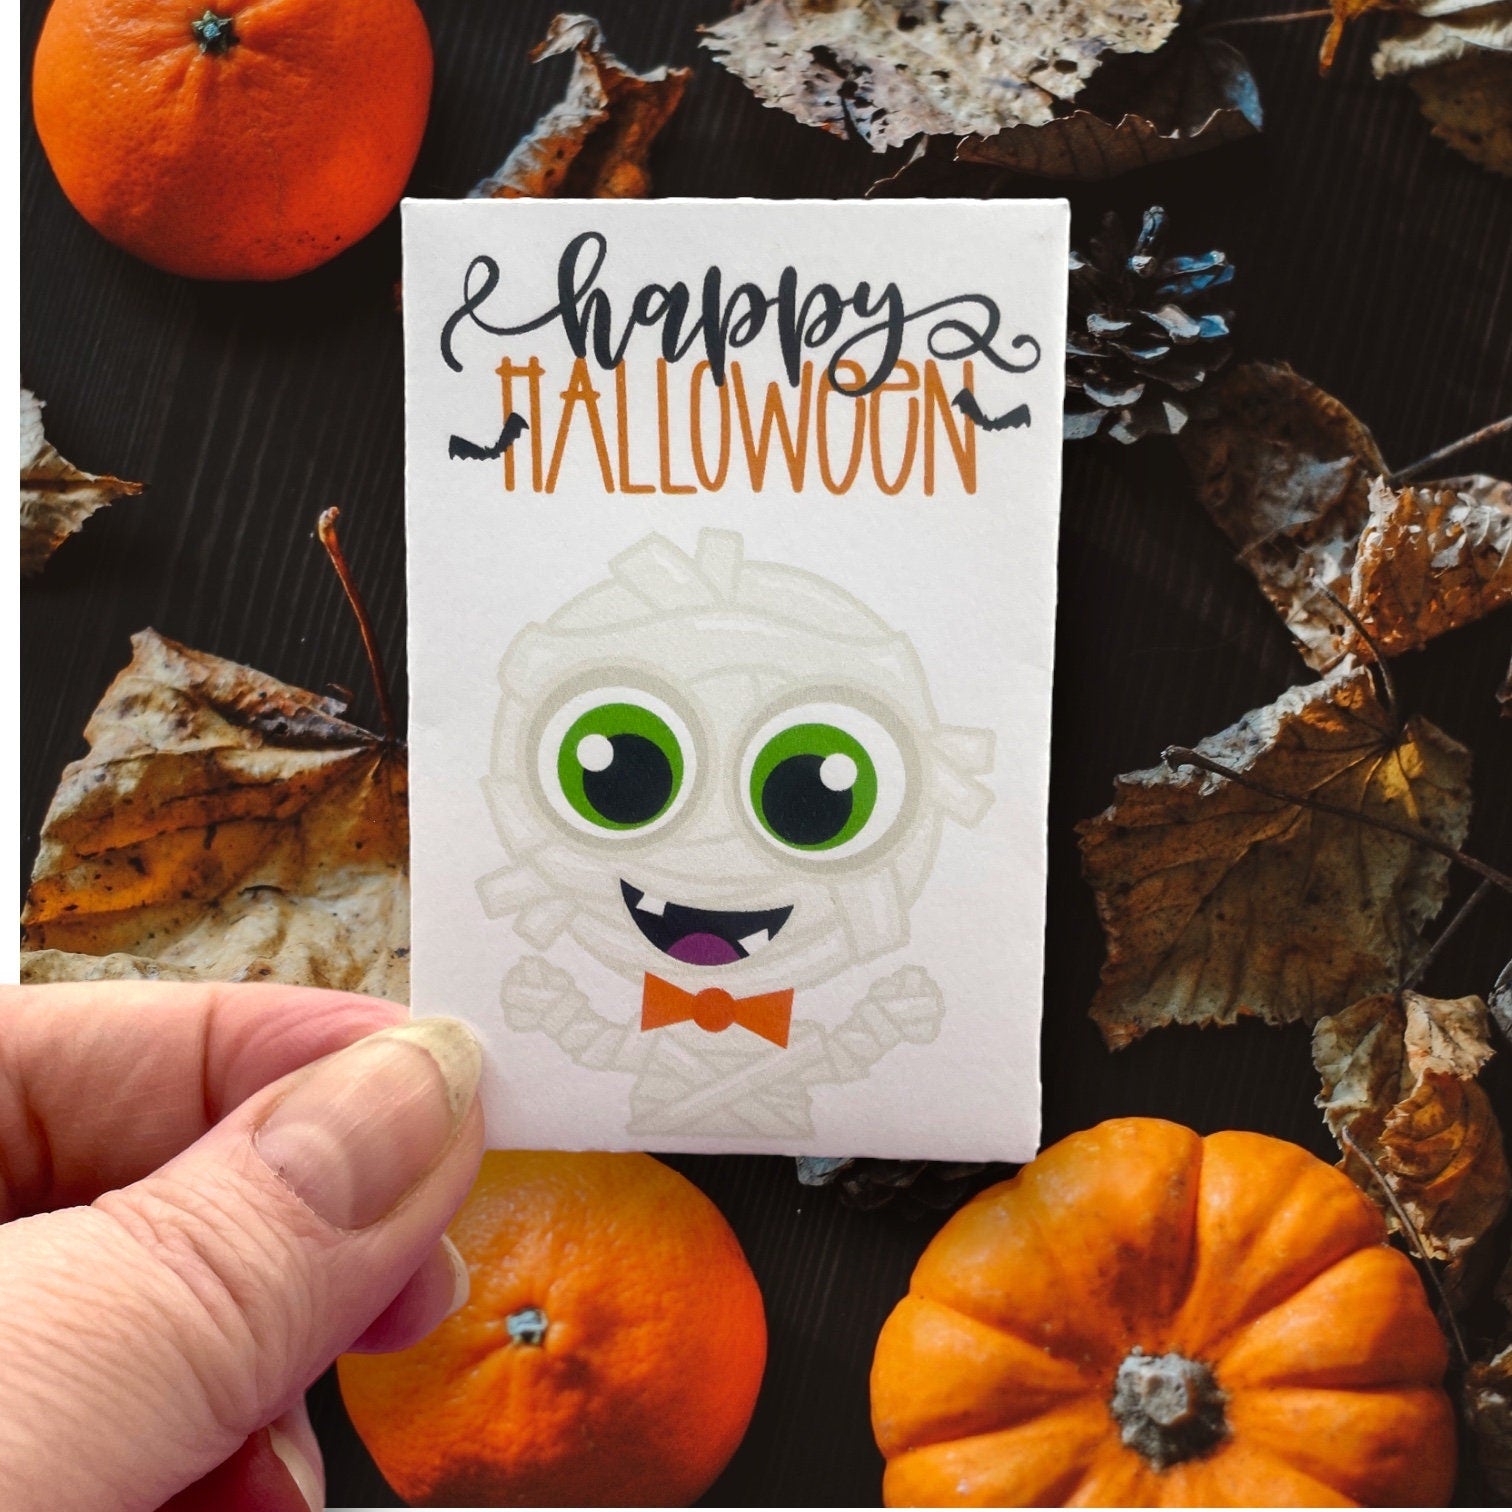 Seed Packages - Halloween Themed for Party Favors or Trick or Treaters - Includes 10 Packages of Pumpkin Seeds